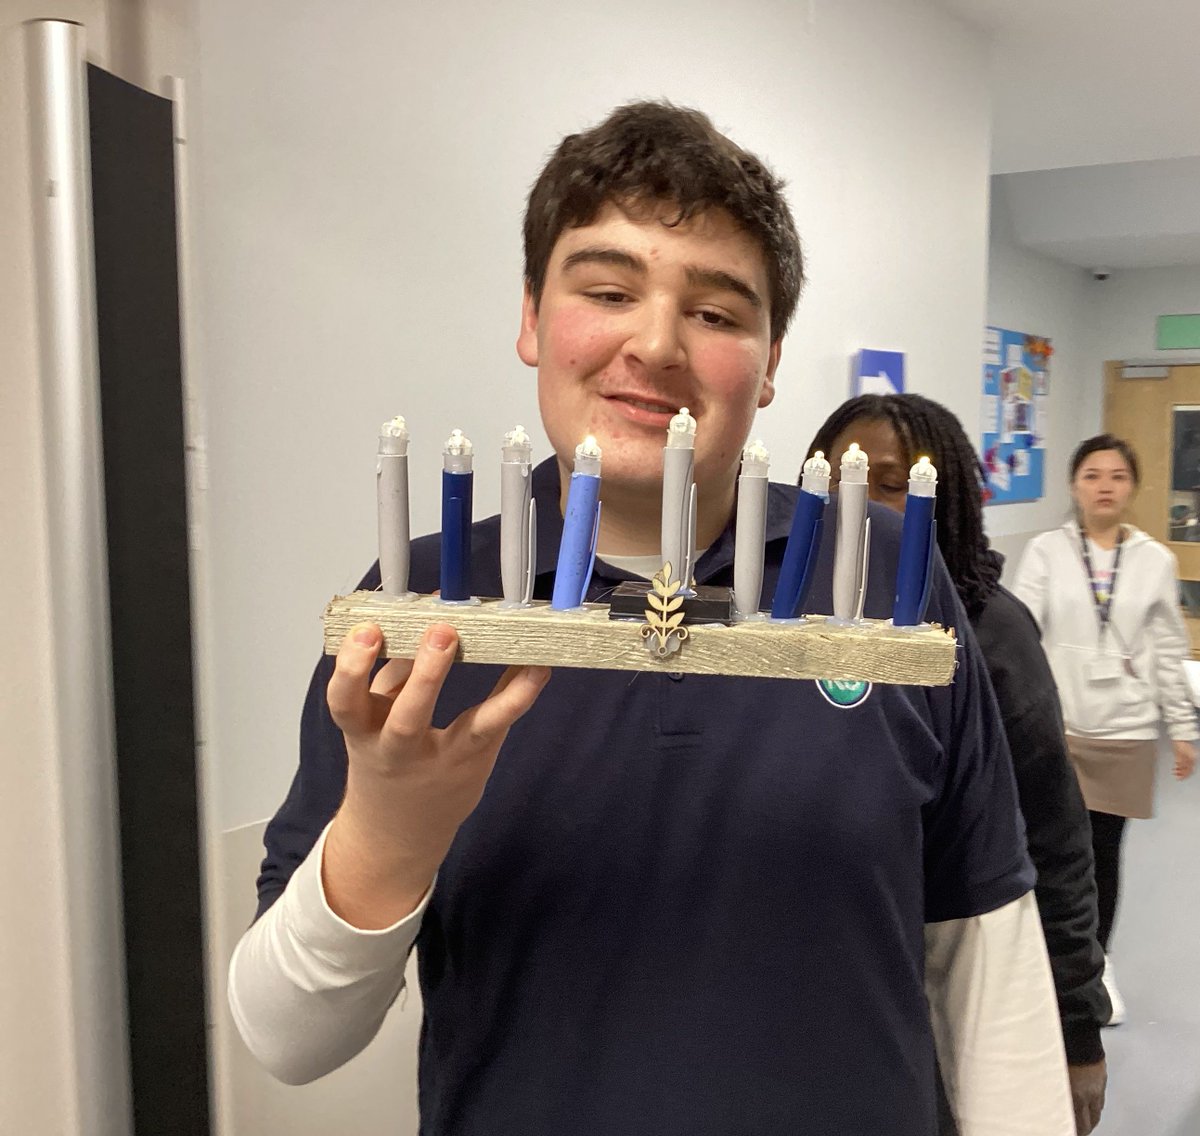 Pupils at Kisharon Noé School attended a really fantastic Chanukah Making workshop where they could be creative making things from recycled materials. It was very impactful educationally by demonstrating how anything can be useful, reused and given a new life. Happy Chanukah!